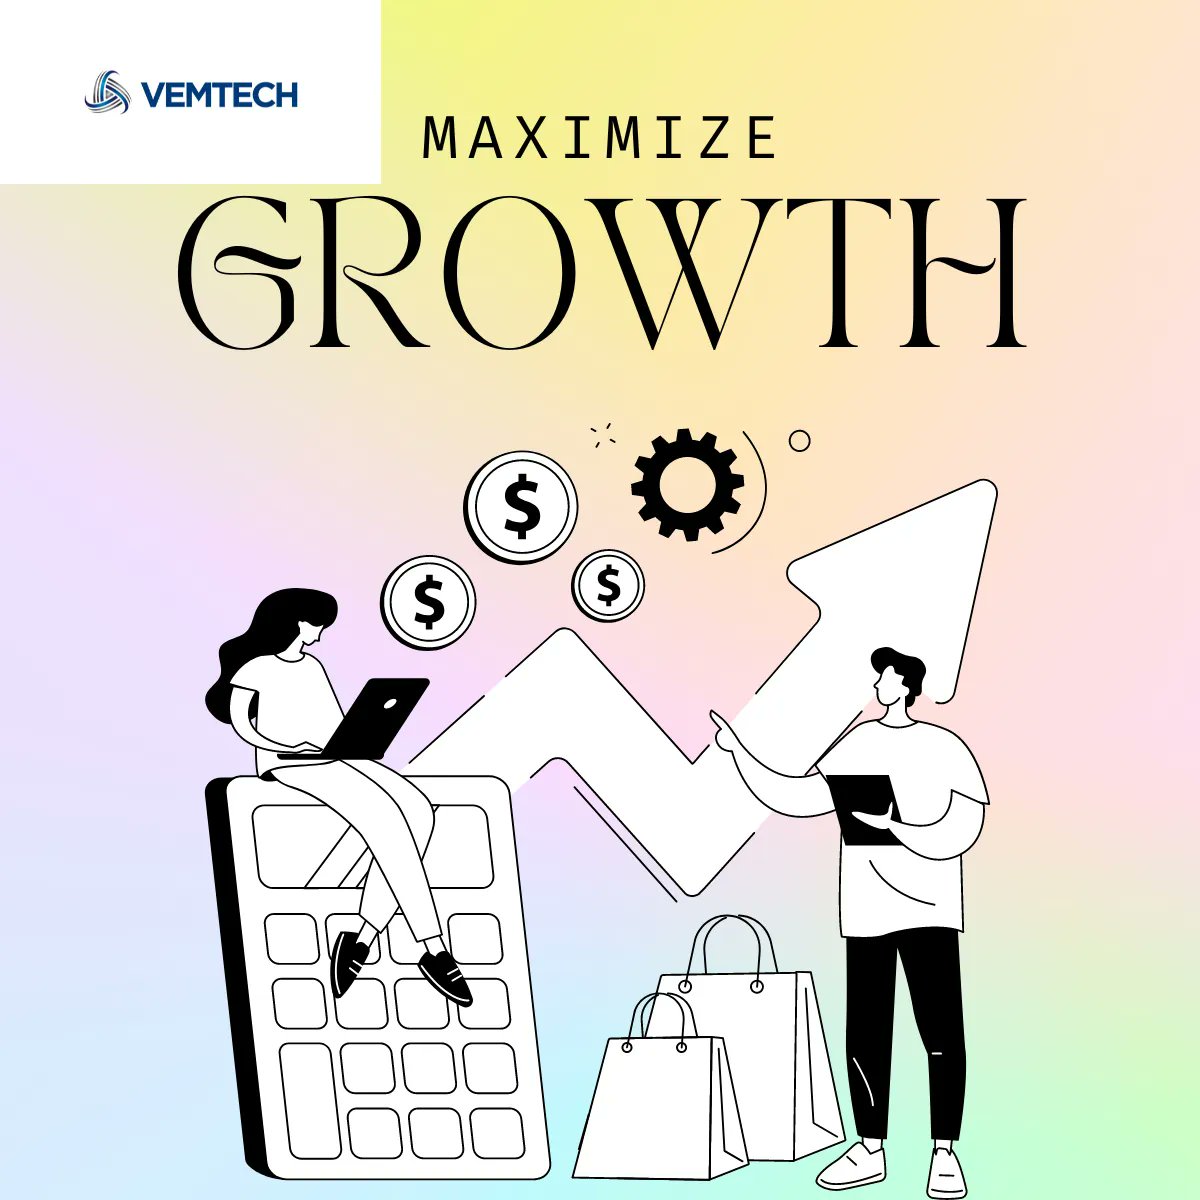 Maximize growth with data-driven insights. Knowledge is power, use it wisely! 📊 
.
.
#DataDrivenGrowth #VemTech  #MartinsburgWV #BerkeleyCountyWV #jeffersoncountywv #hagerstownmd #frederickmd #loudouncountyva #winchesterva #philadelphia #ColumbiaMD #Baltimoremd